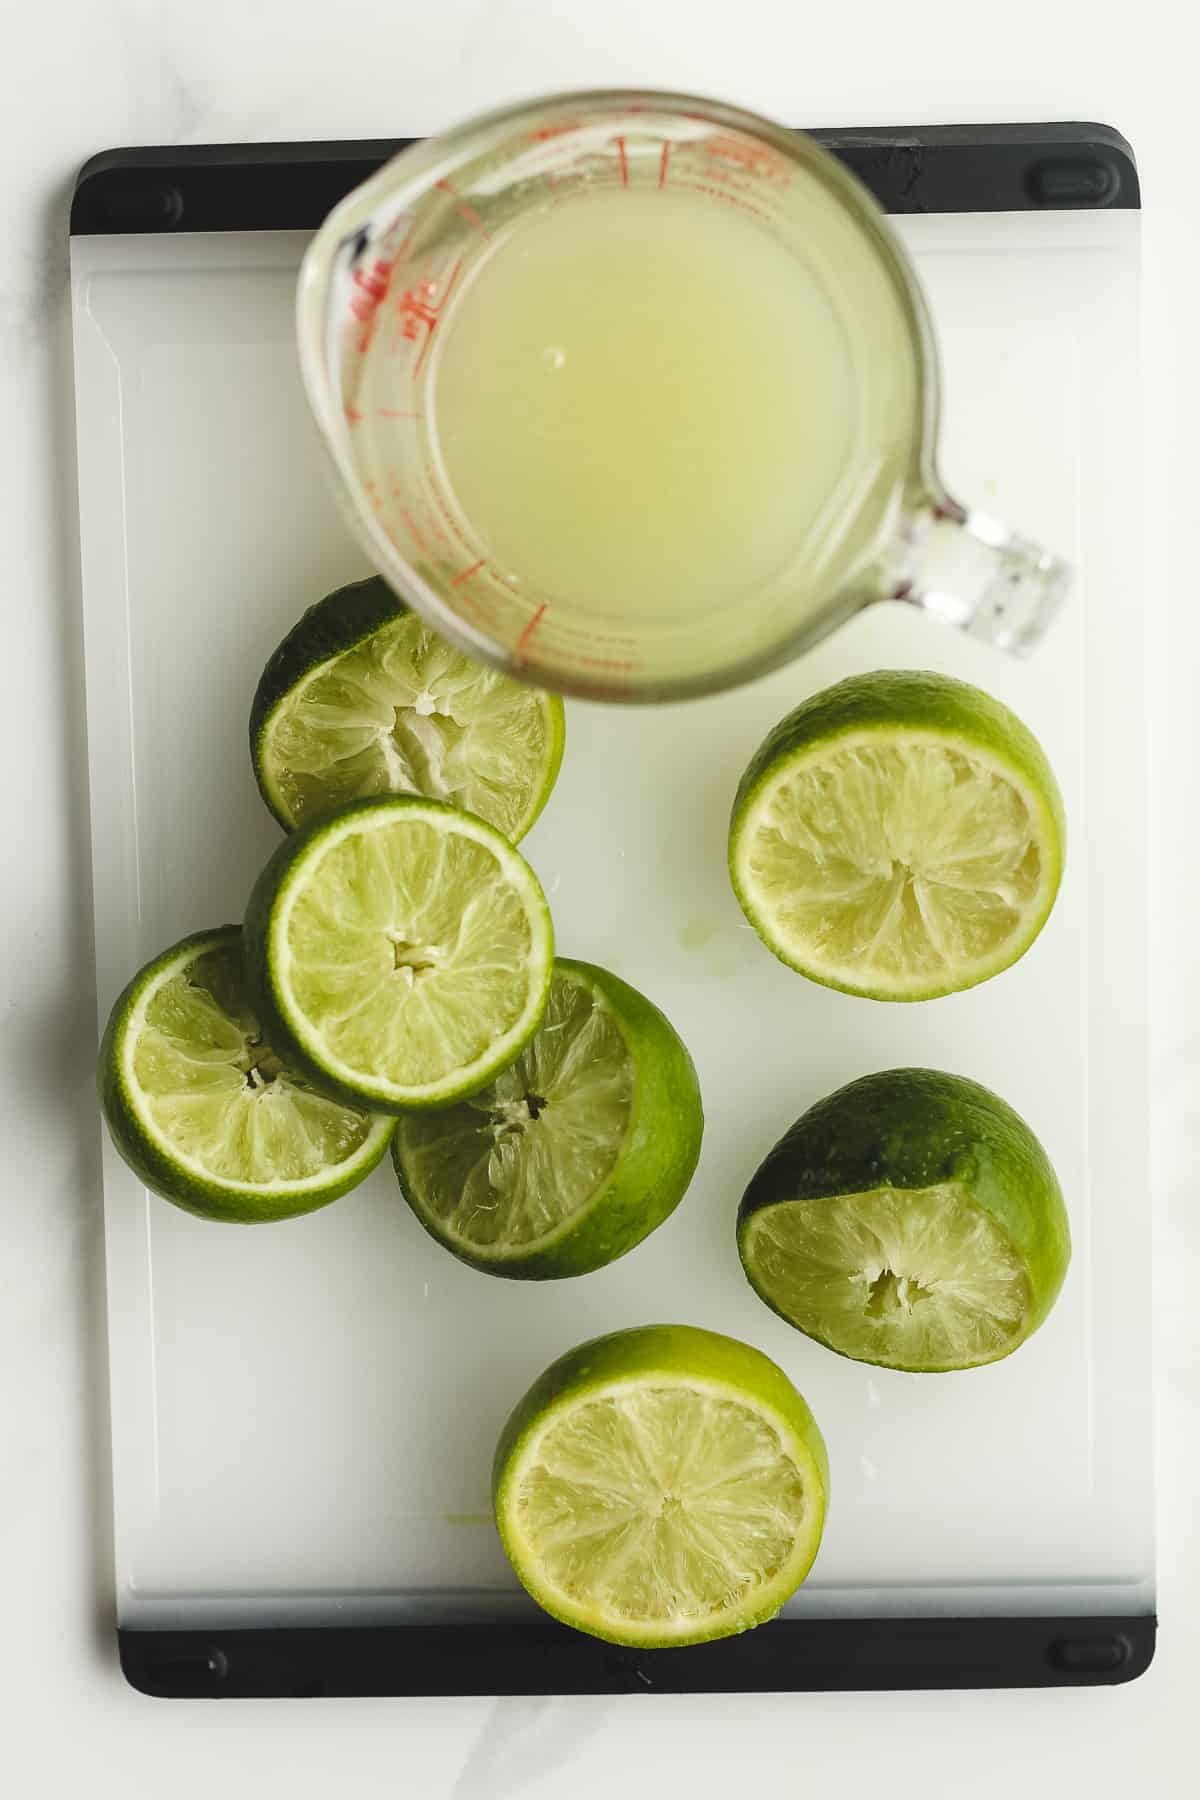 Some squeezed limes plus the lime juice.